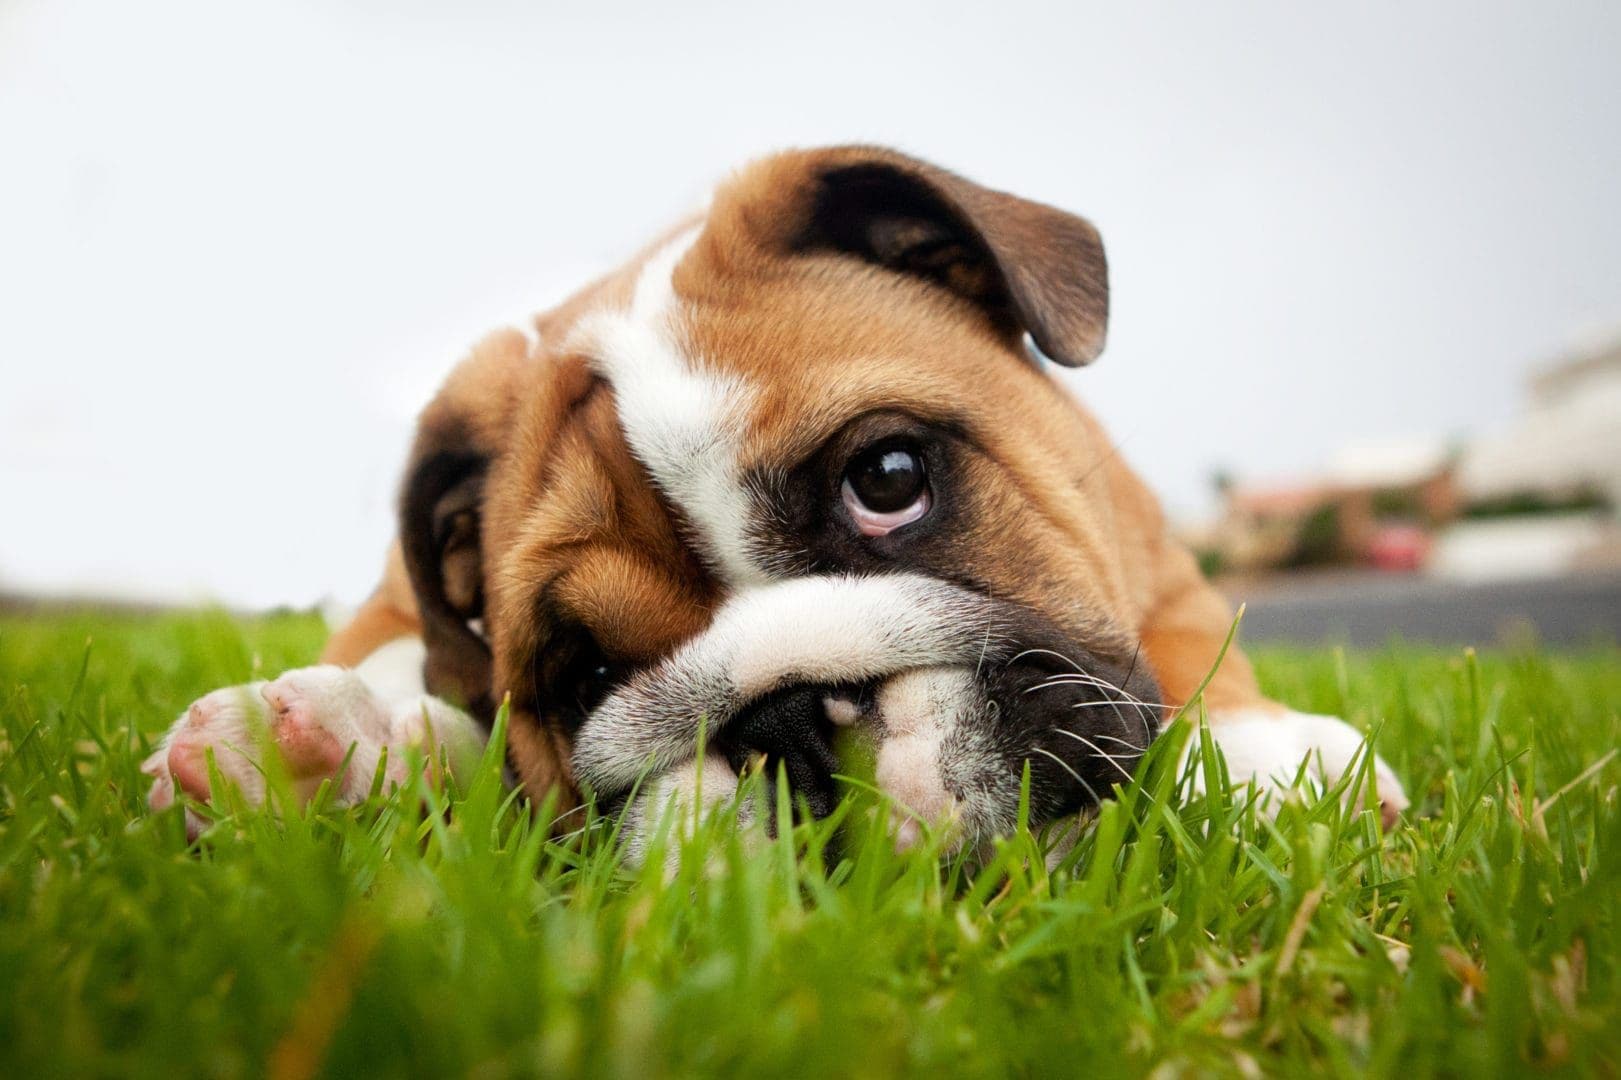 Worms in dogs: What are the types, symptoms and treatments